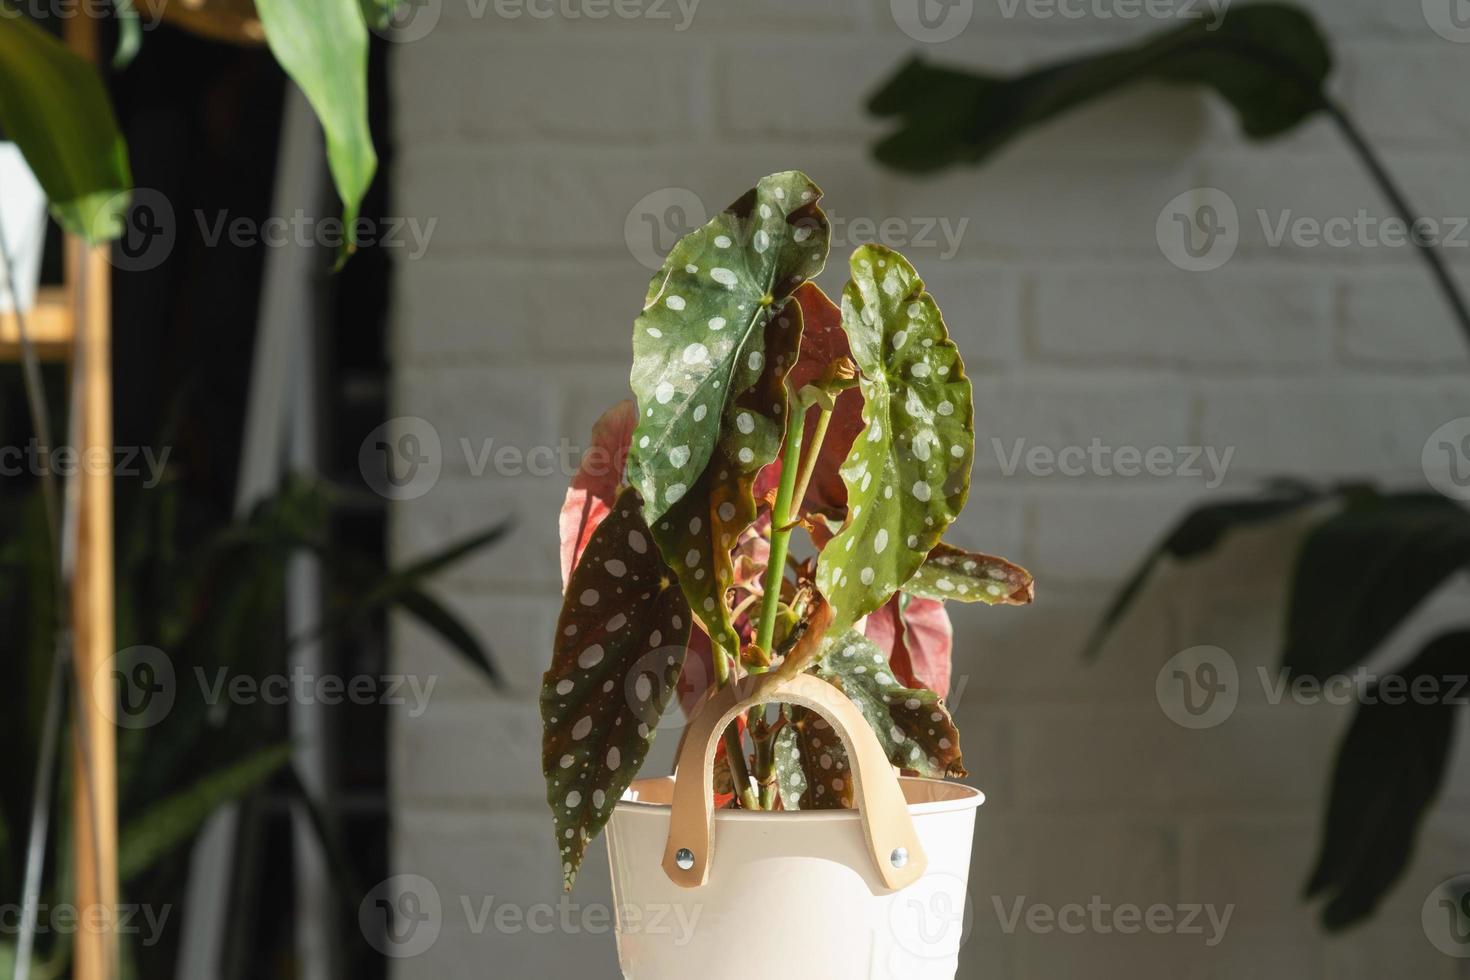 Home potted plant begonia maculata polka dot leaves decorative deciduous in interior on table of house. Hobbies in growing, greenhome photo